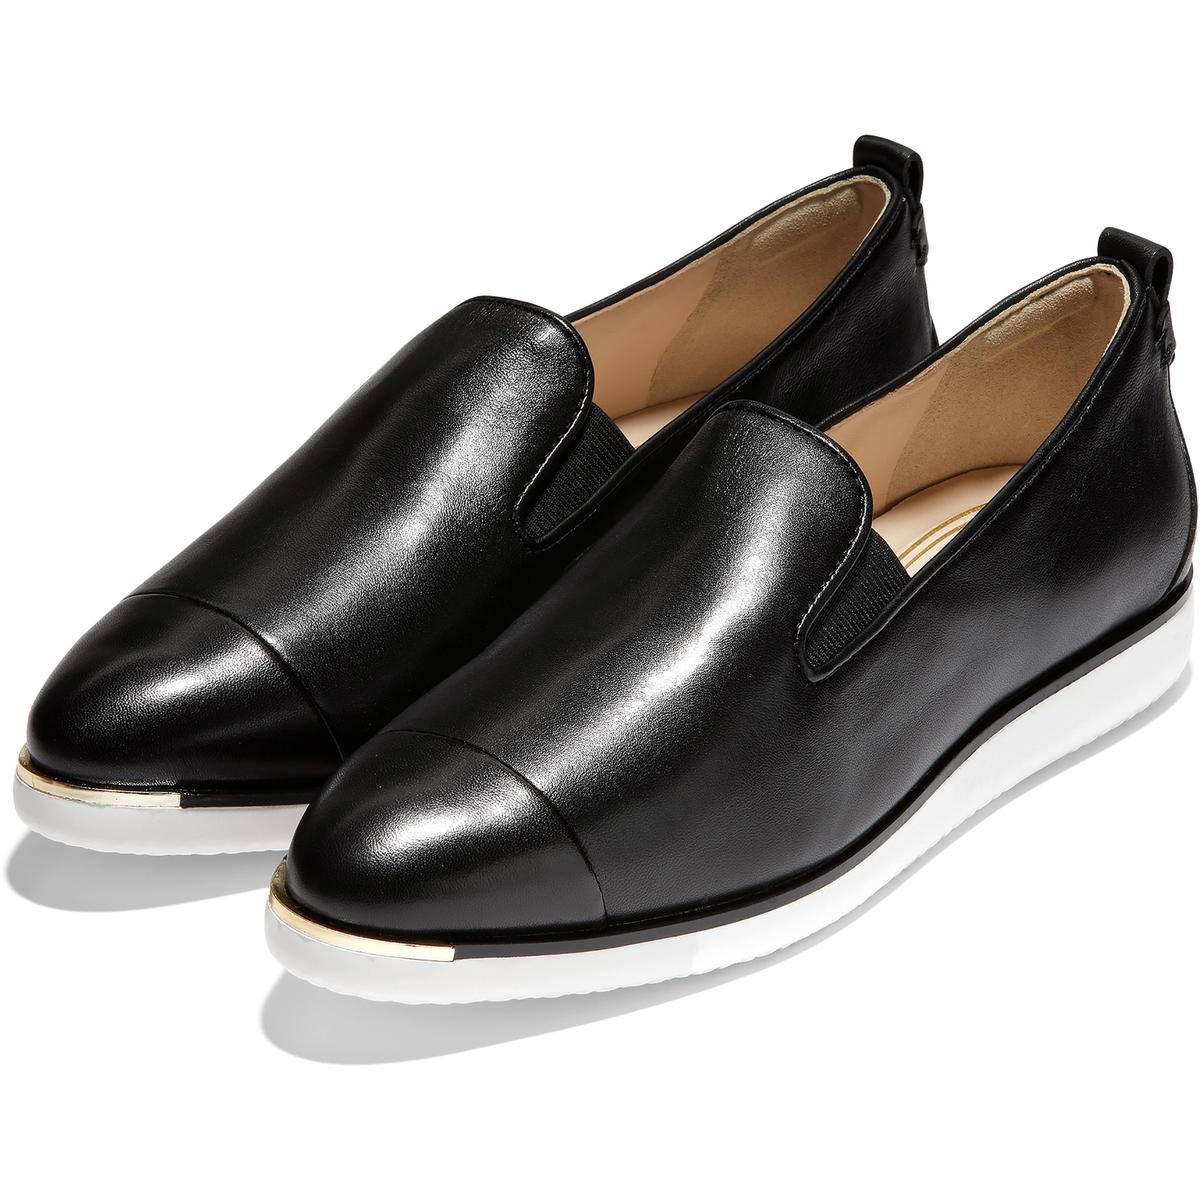 Cole Haan Womens Grand Ambition Leather Slip On Casual Shoes Flats BHFO ...